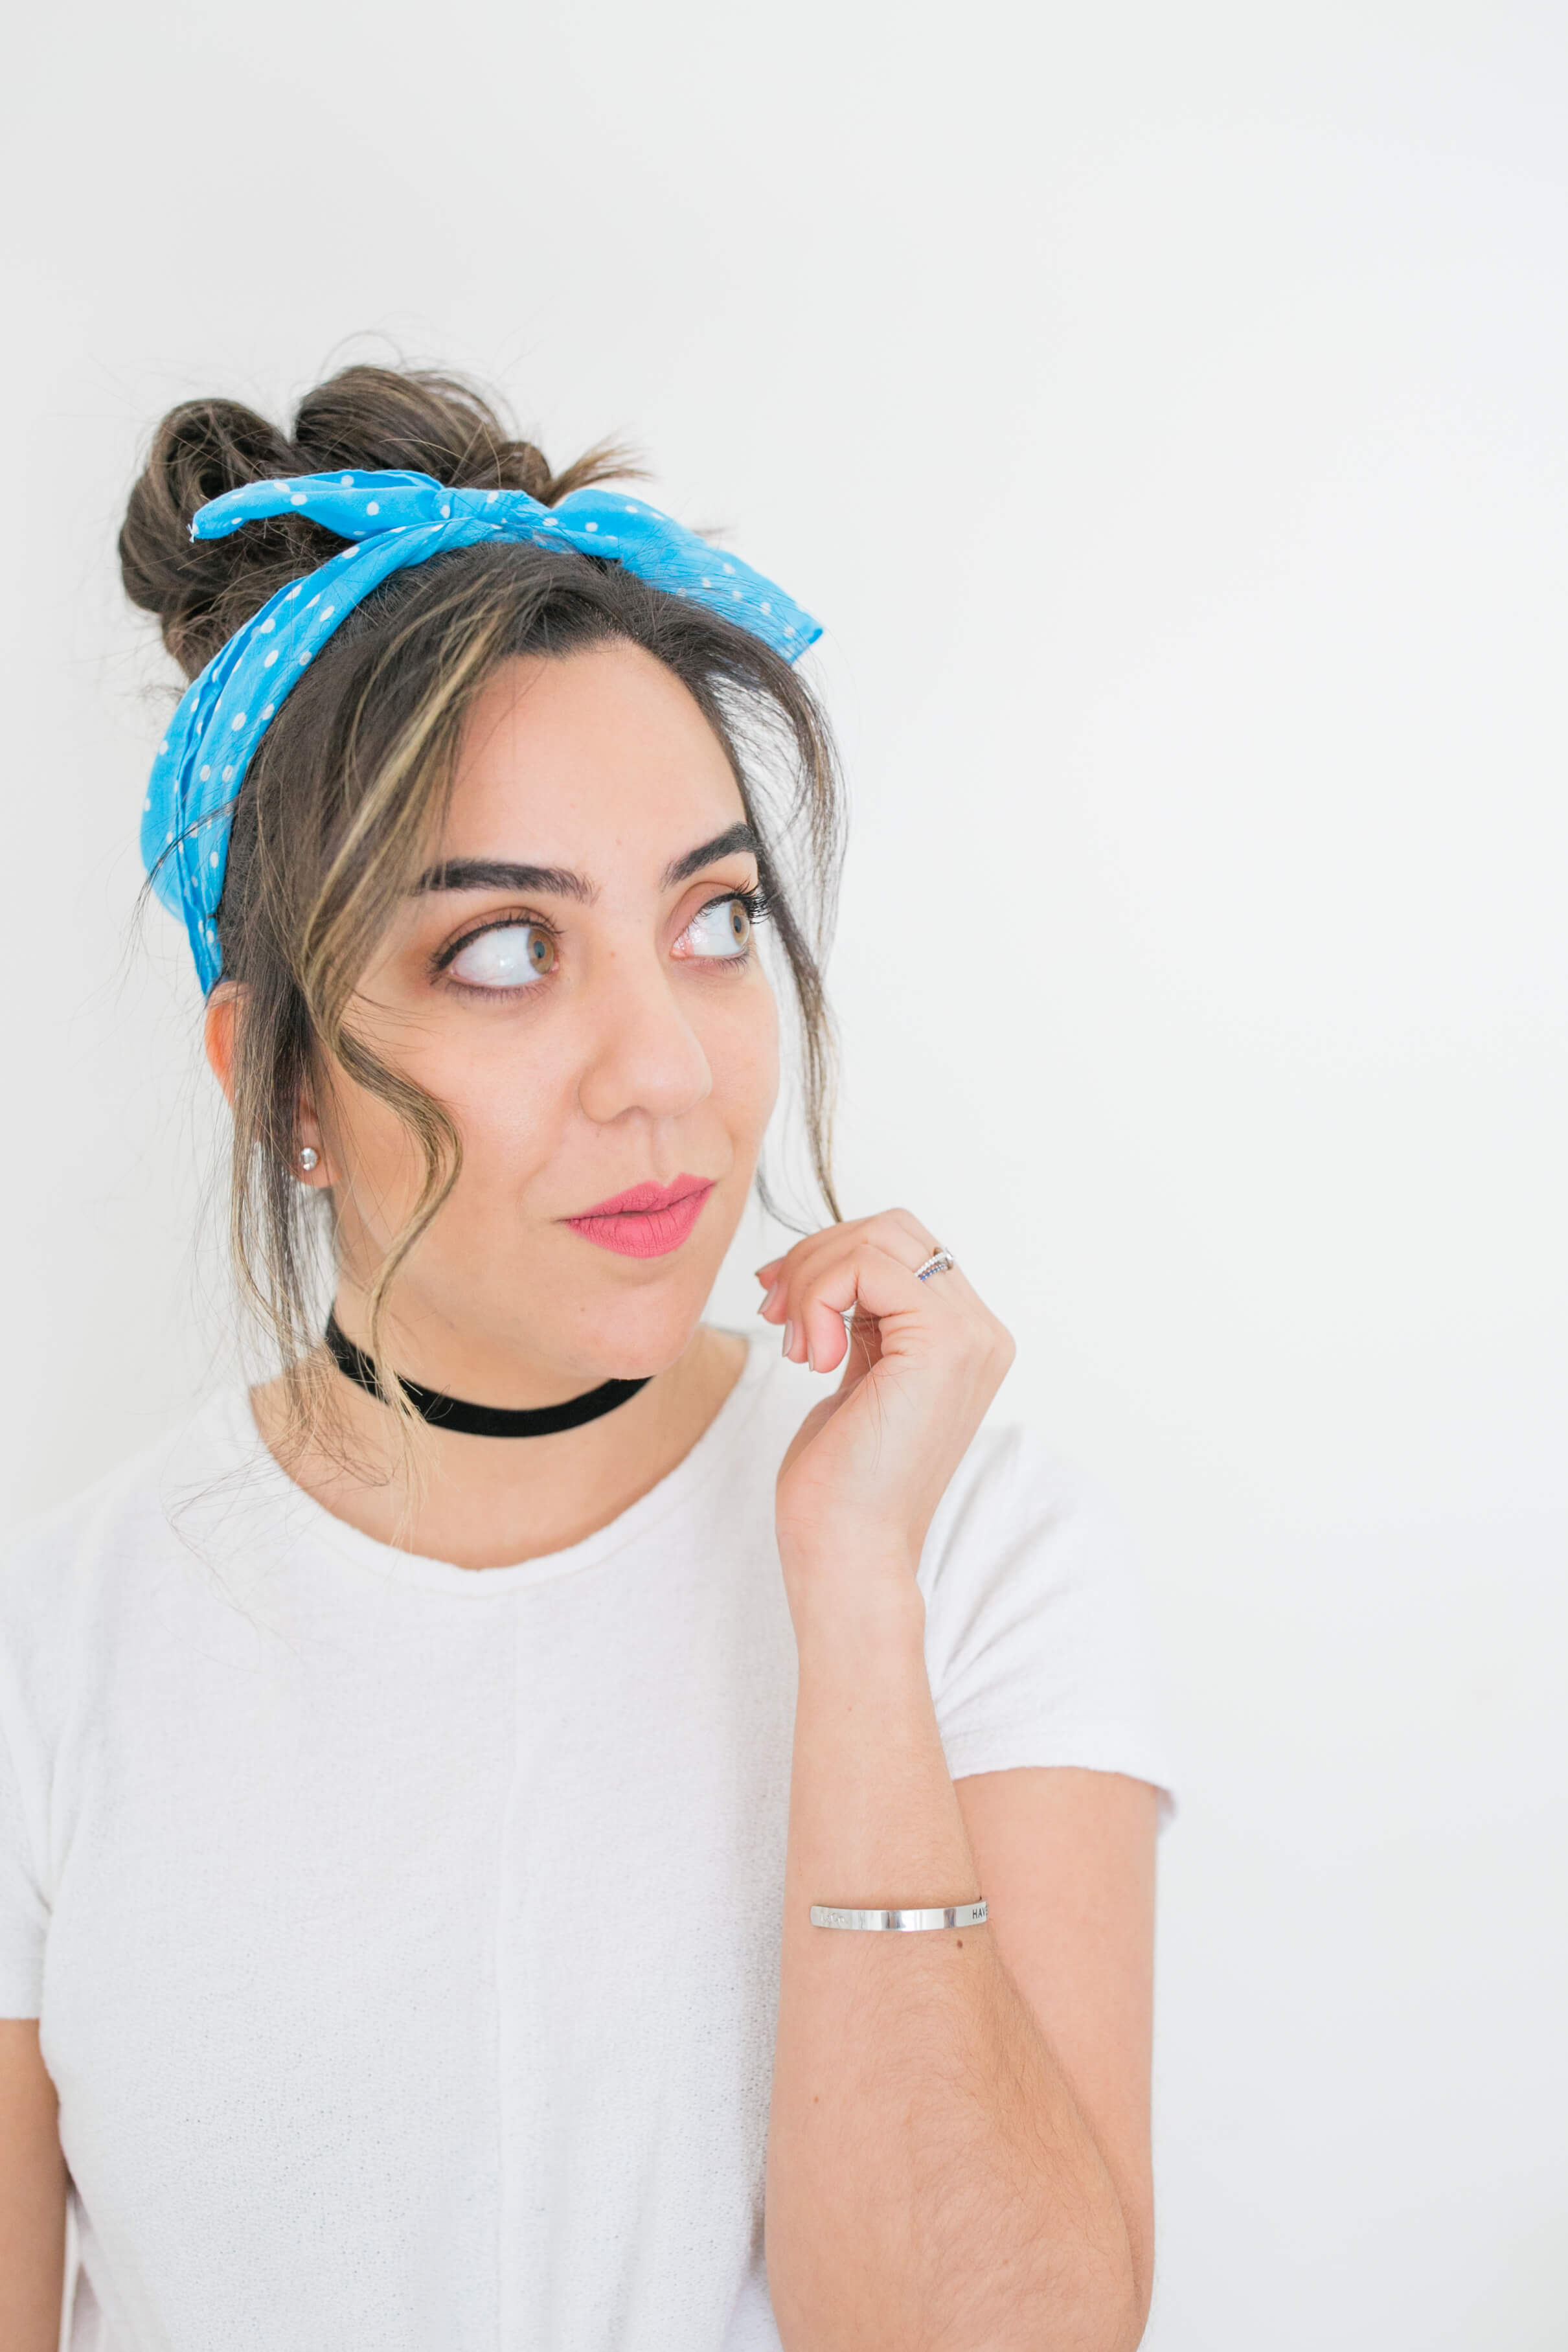 A quick and simple Cinderella top knot tutorial inspired by one of the original Disney princesses! A step-by-step style for your next Disneybound.